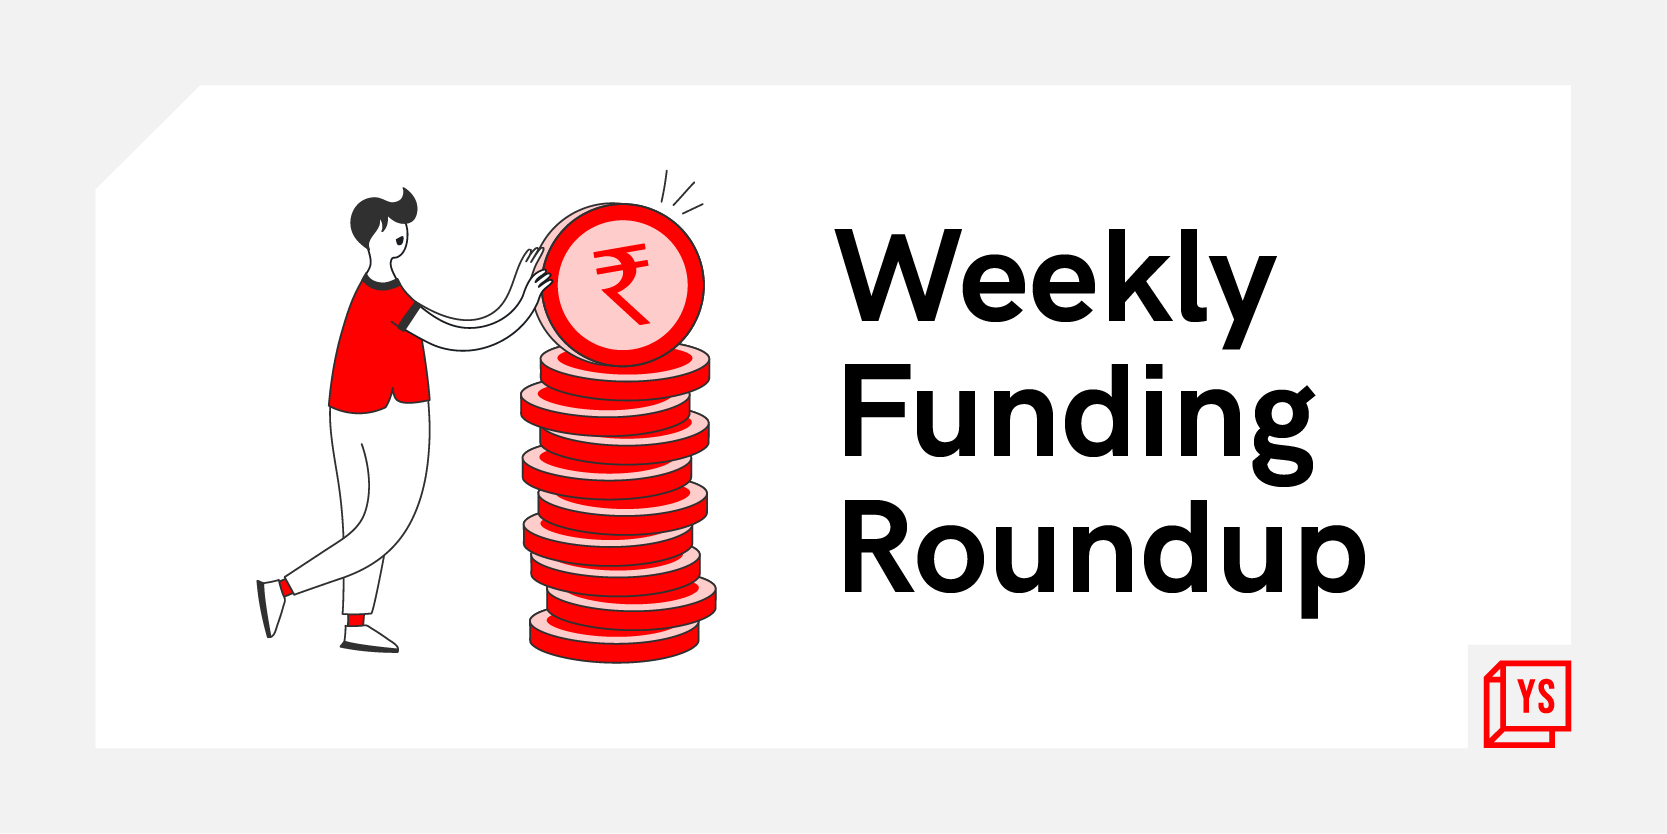 [Weekly funding roundup July 18-22] Venture capital investments shrink 

